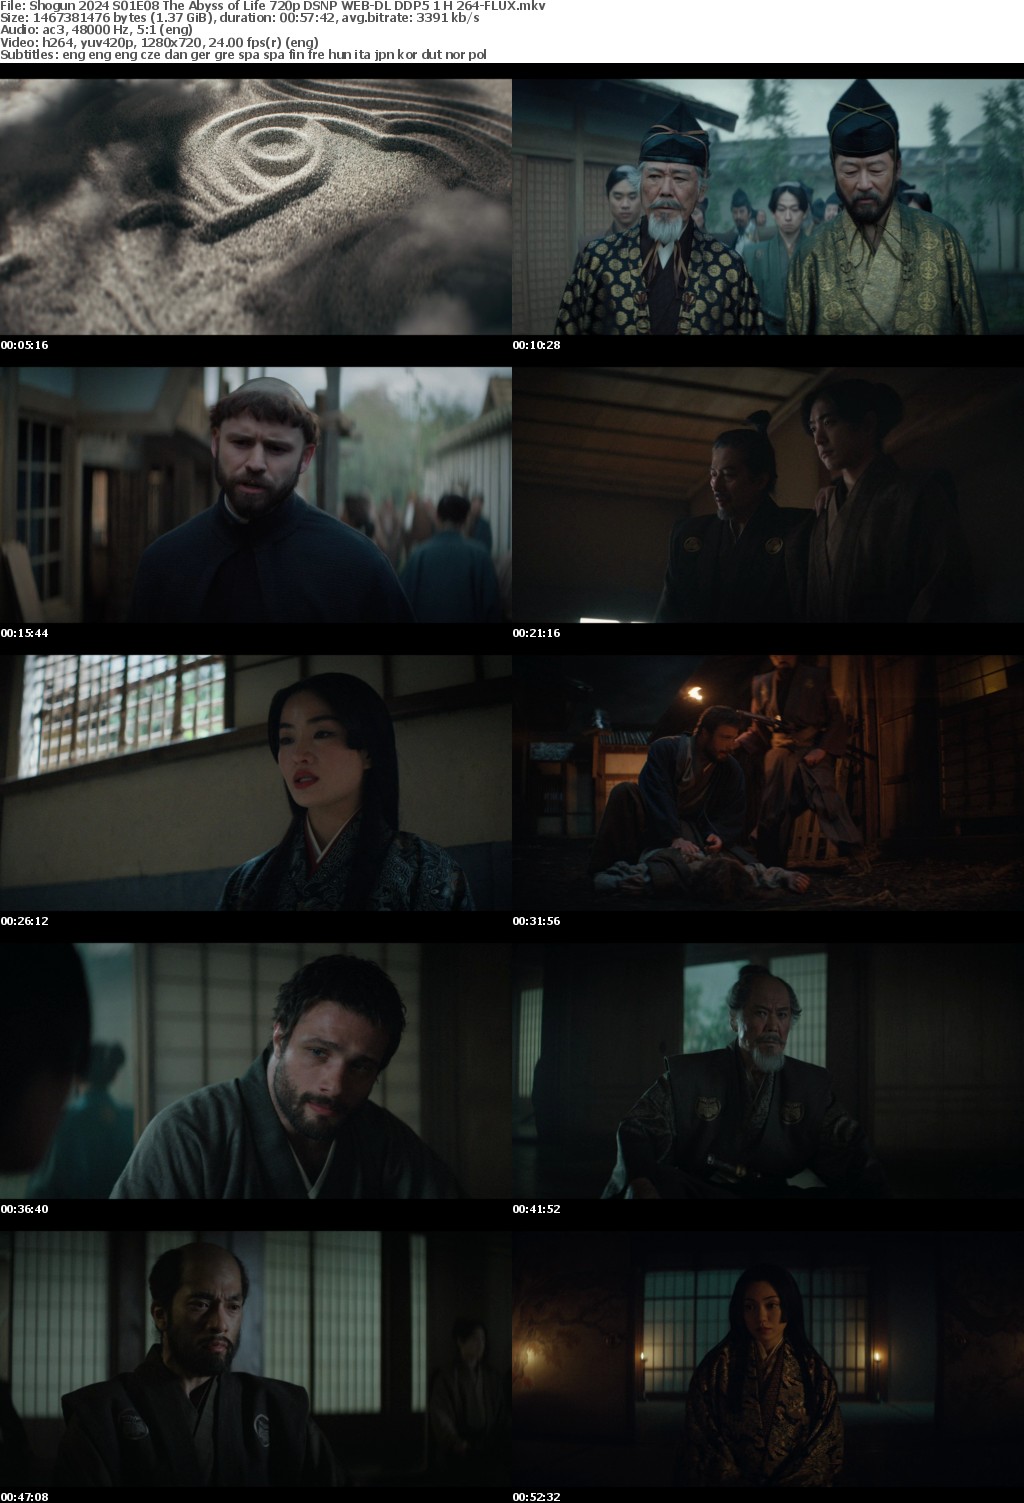 Shogun 2024 S01E08 The Abyss of Life 720p DSNP WEB-DL DDP5 1 H 264-FLUX